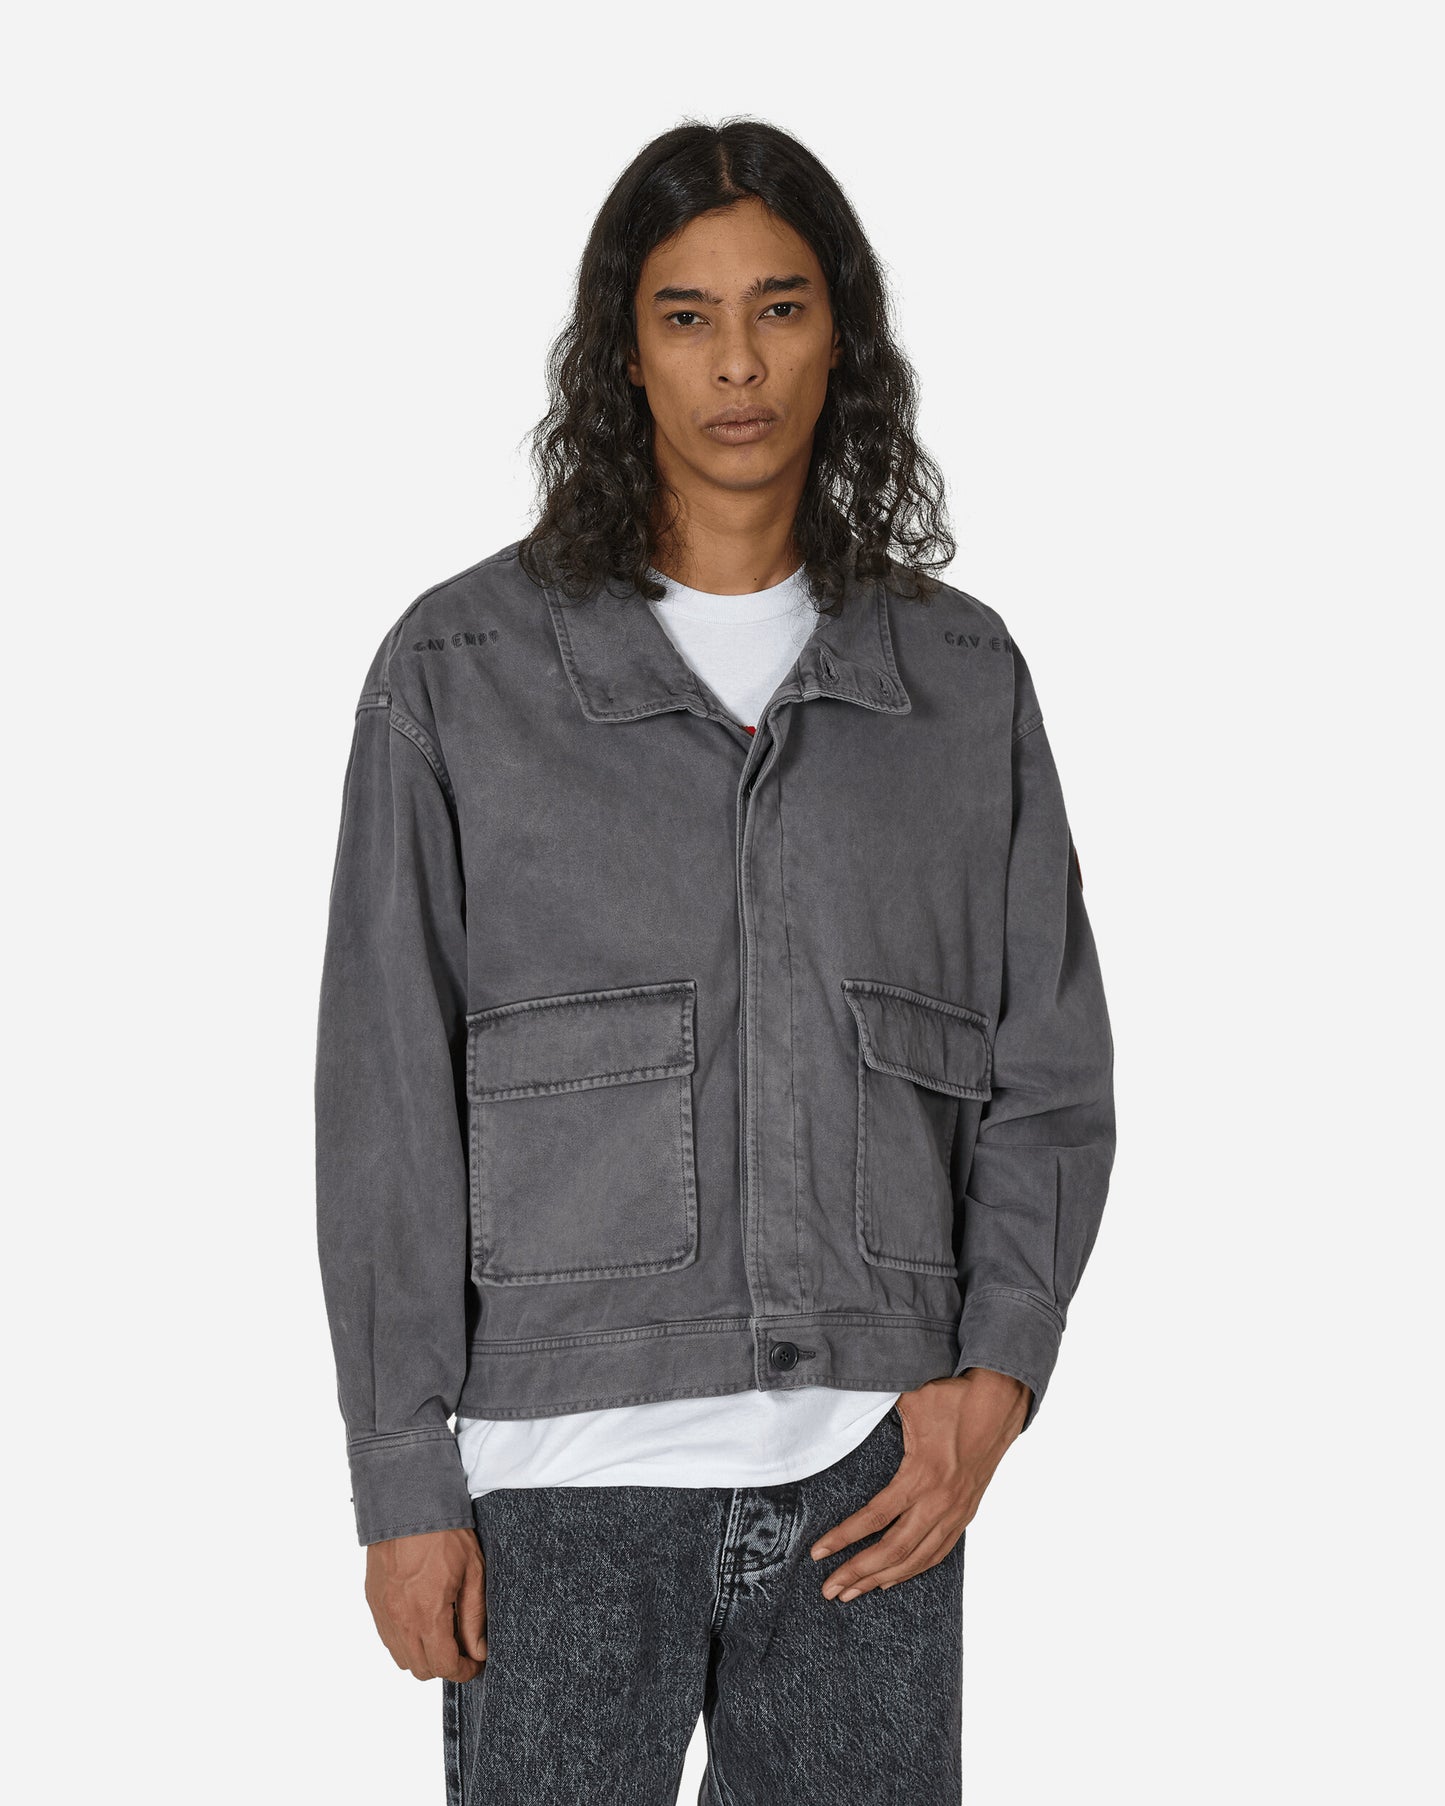 Cav Empt Overdye Brushed Cotton Button Jacket Charcoal Coats and Jackets Jackets CES25JK12 CHCL